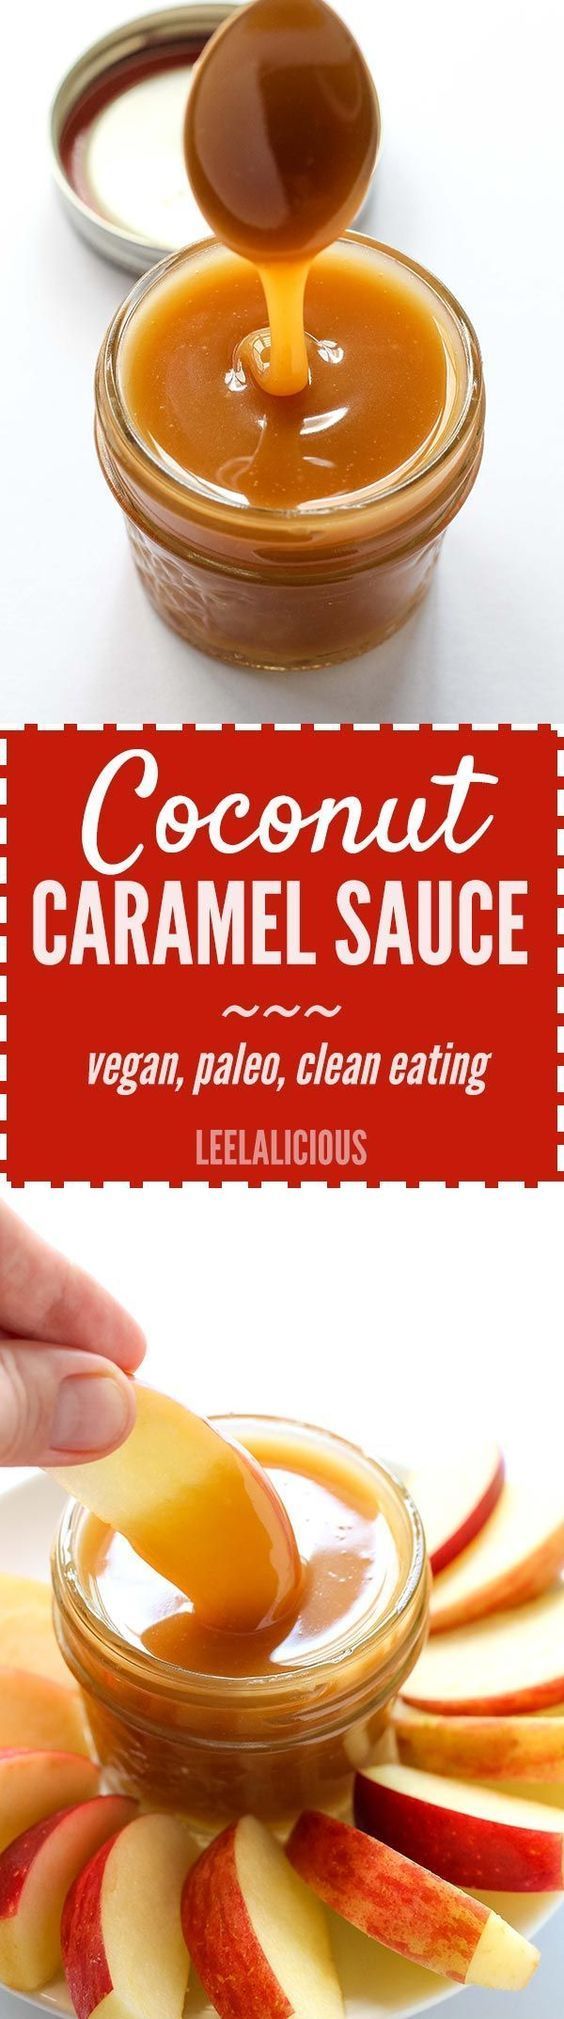 Learn how to make delicious Vegan Caramel Sauce with coconut milk. This awesome re